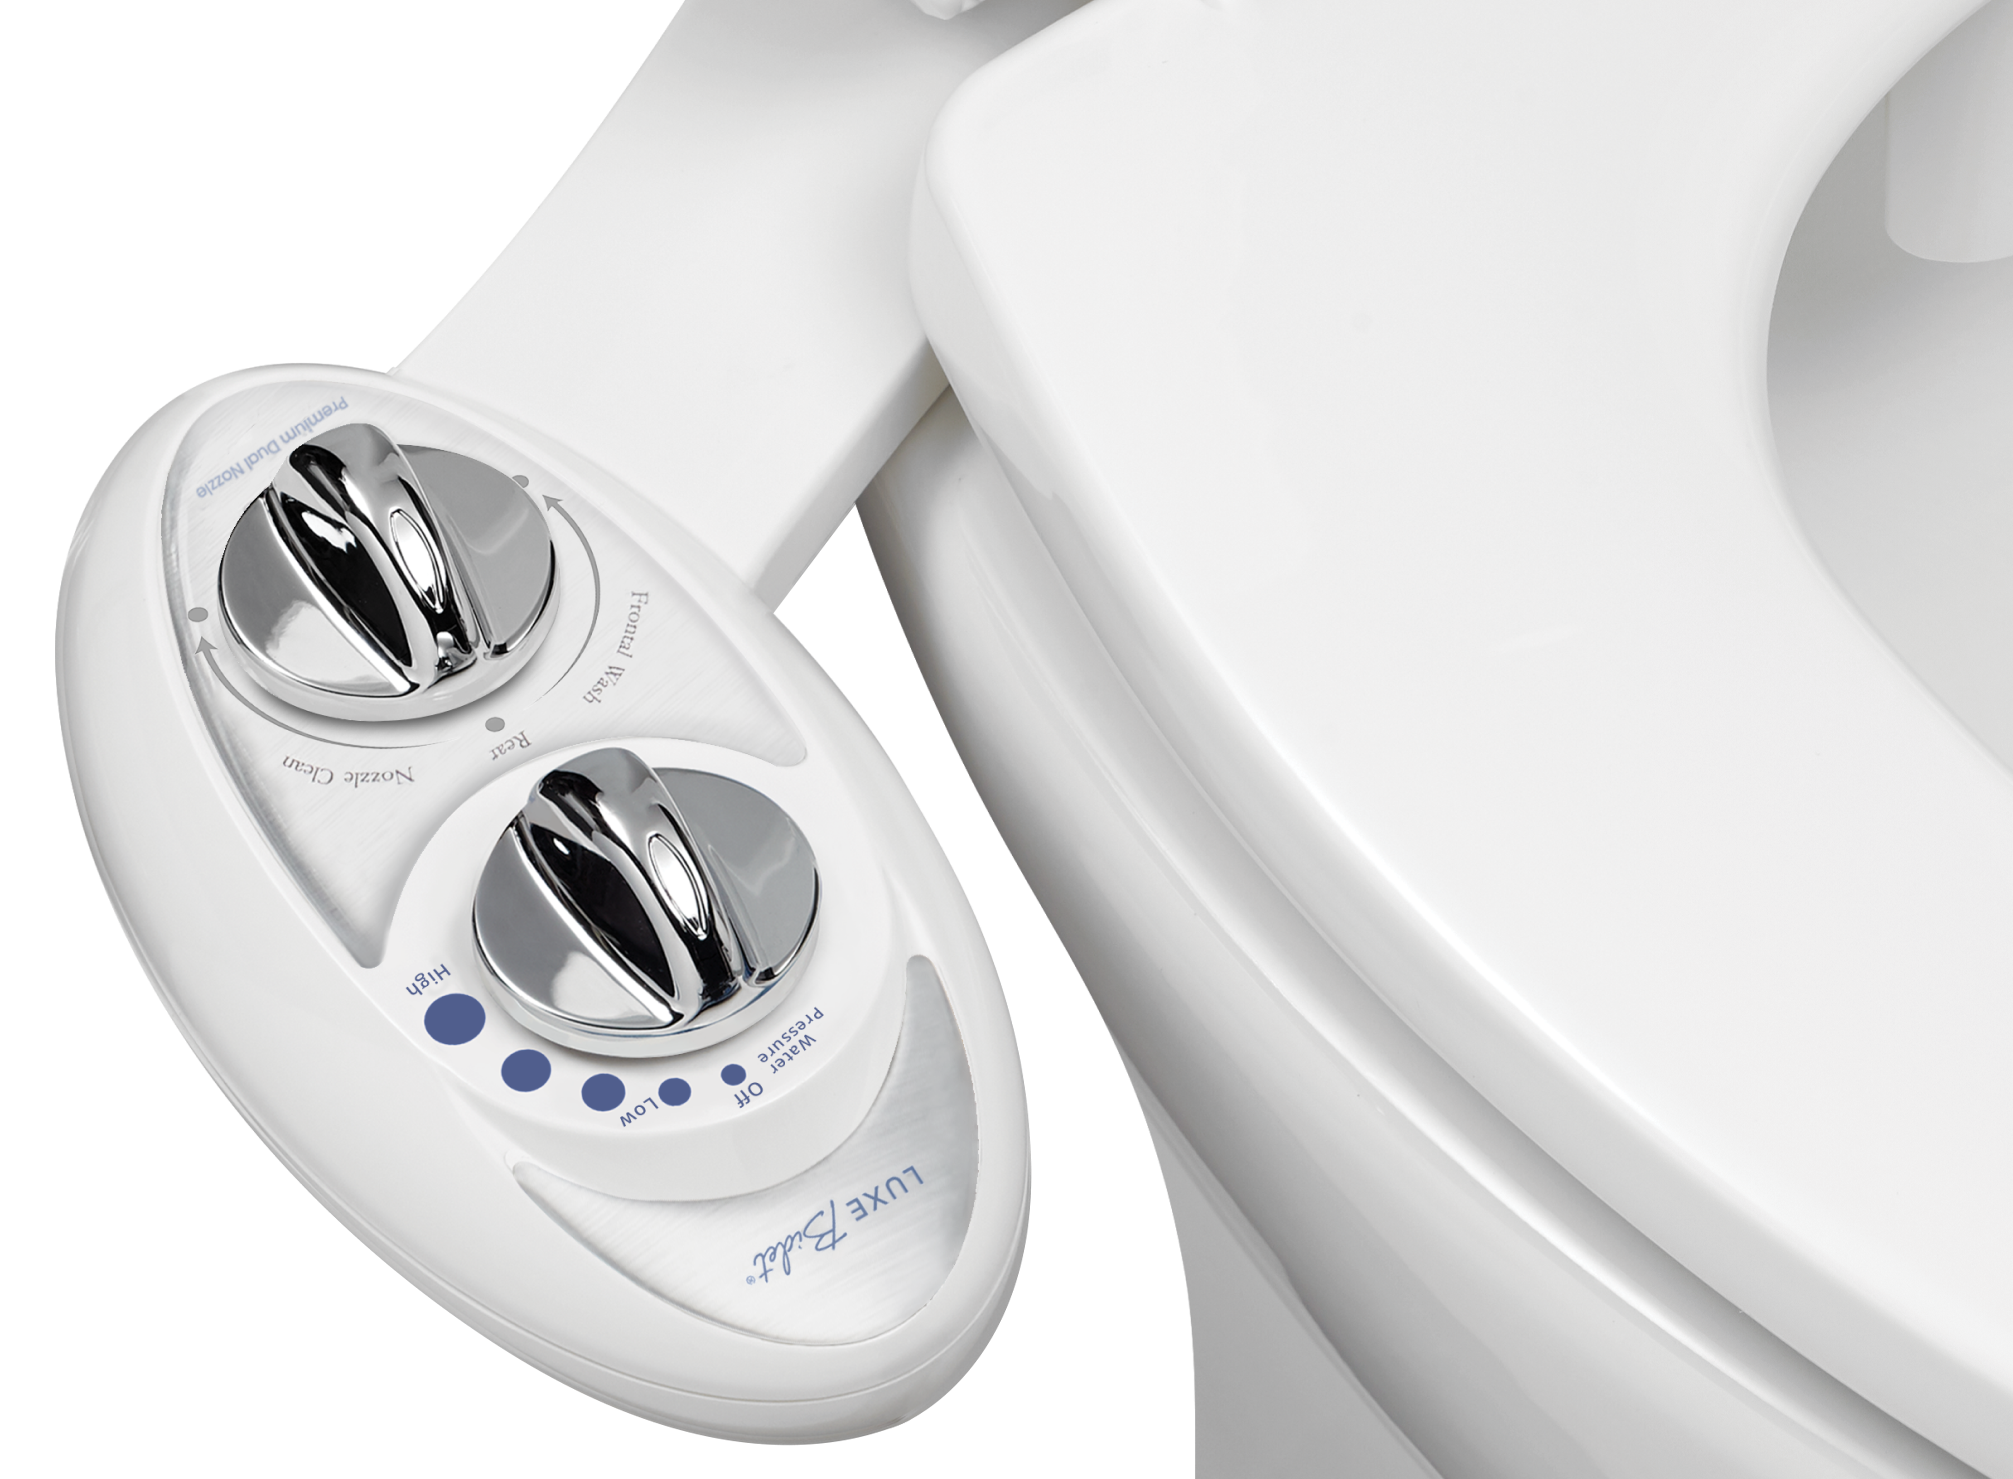 LUXE Bidet W85 Self-Cleaning, Dual Nozzle, Non-Electric Bidet Attachment for Toilet Seat, Adjustable Water Pressure, Rear and Feminine Wash (Pearl Gray) - image 1 of 5